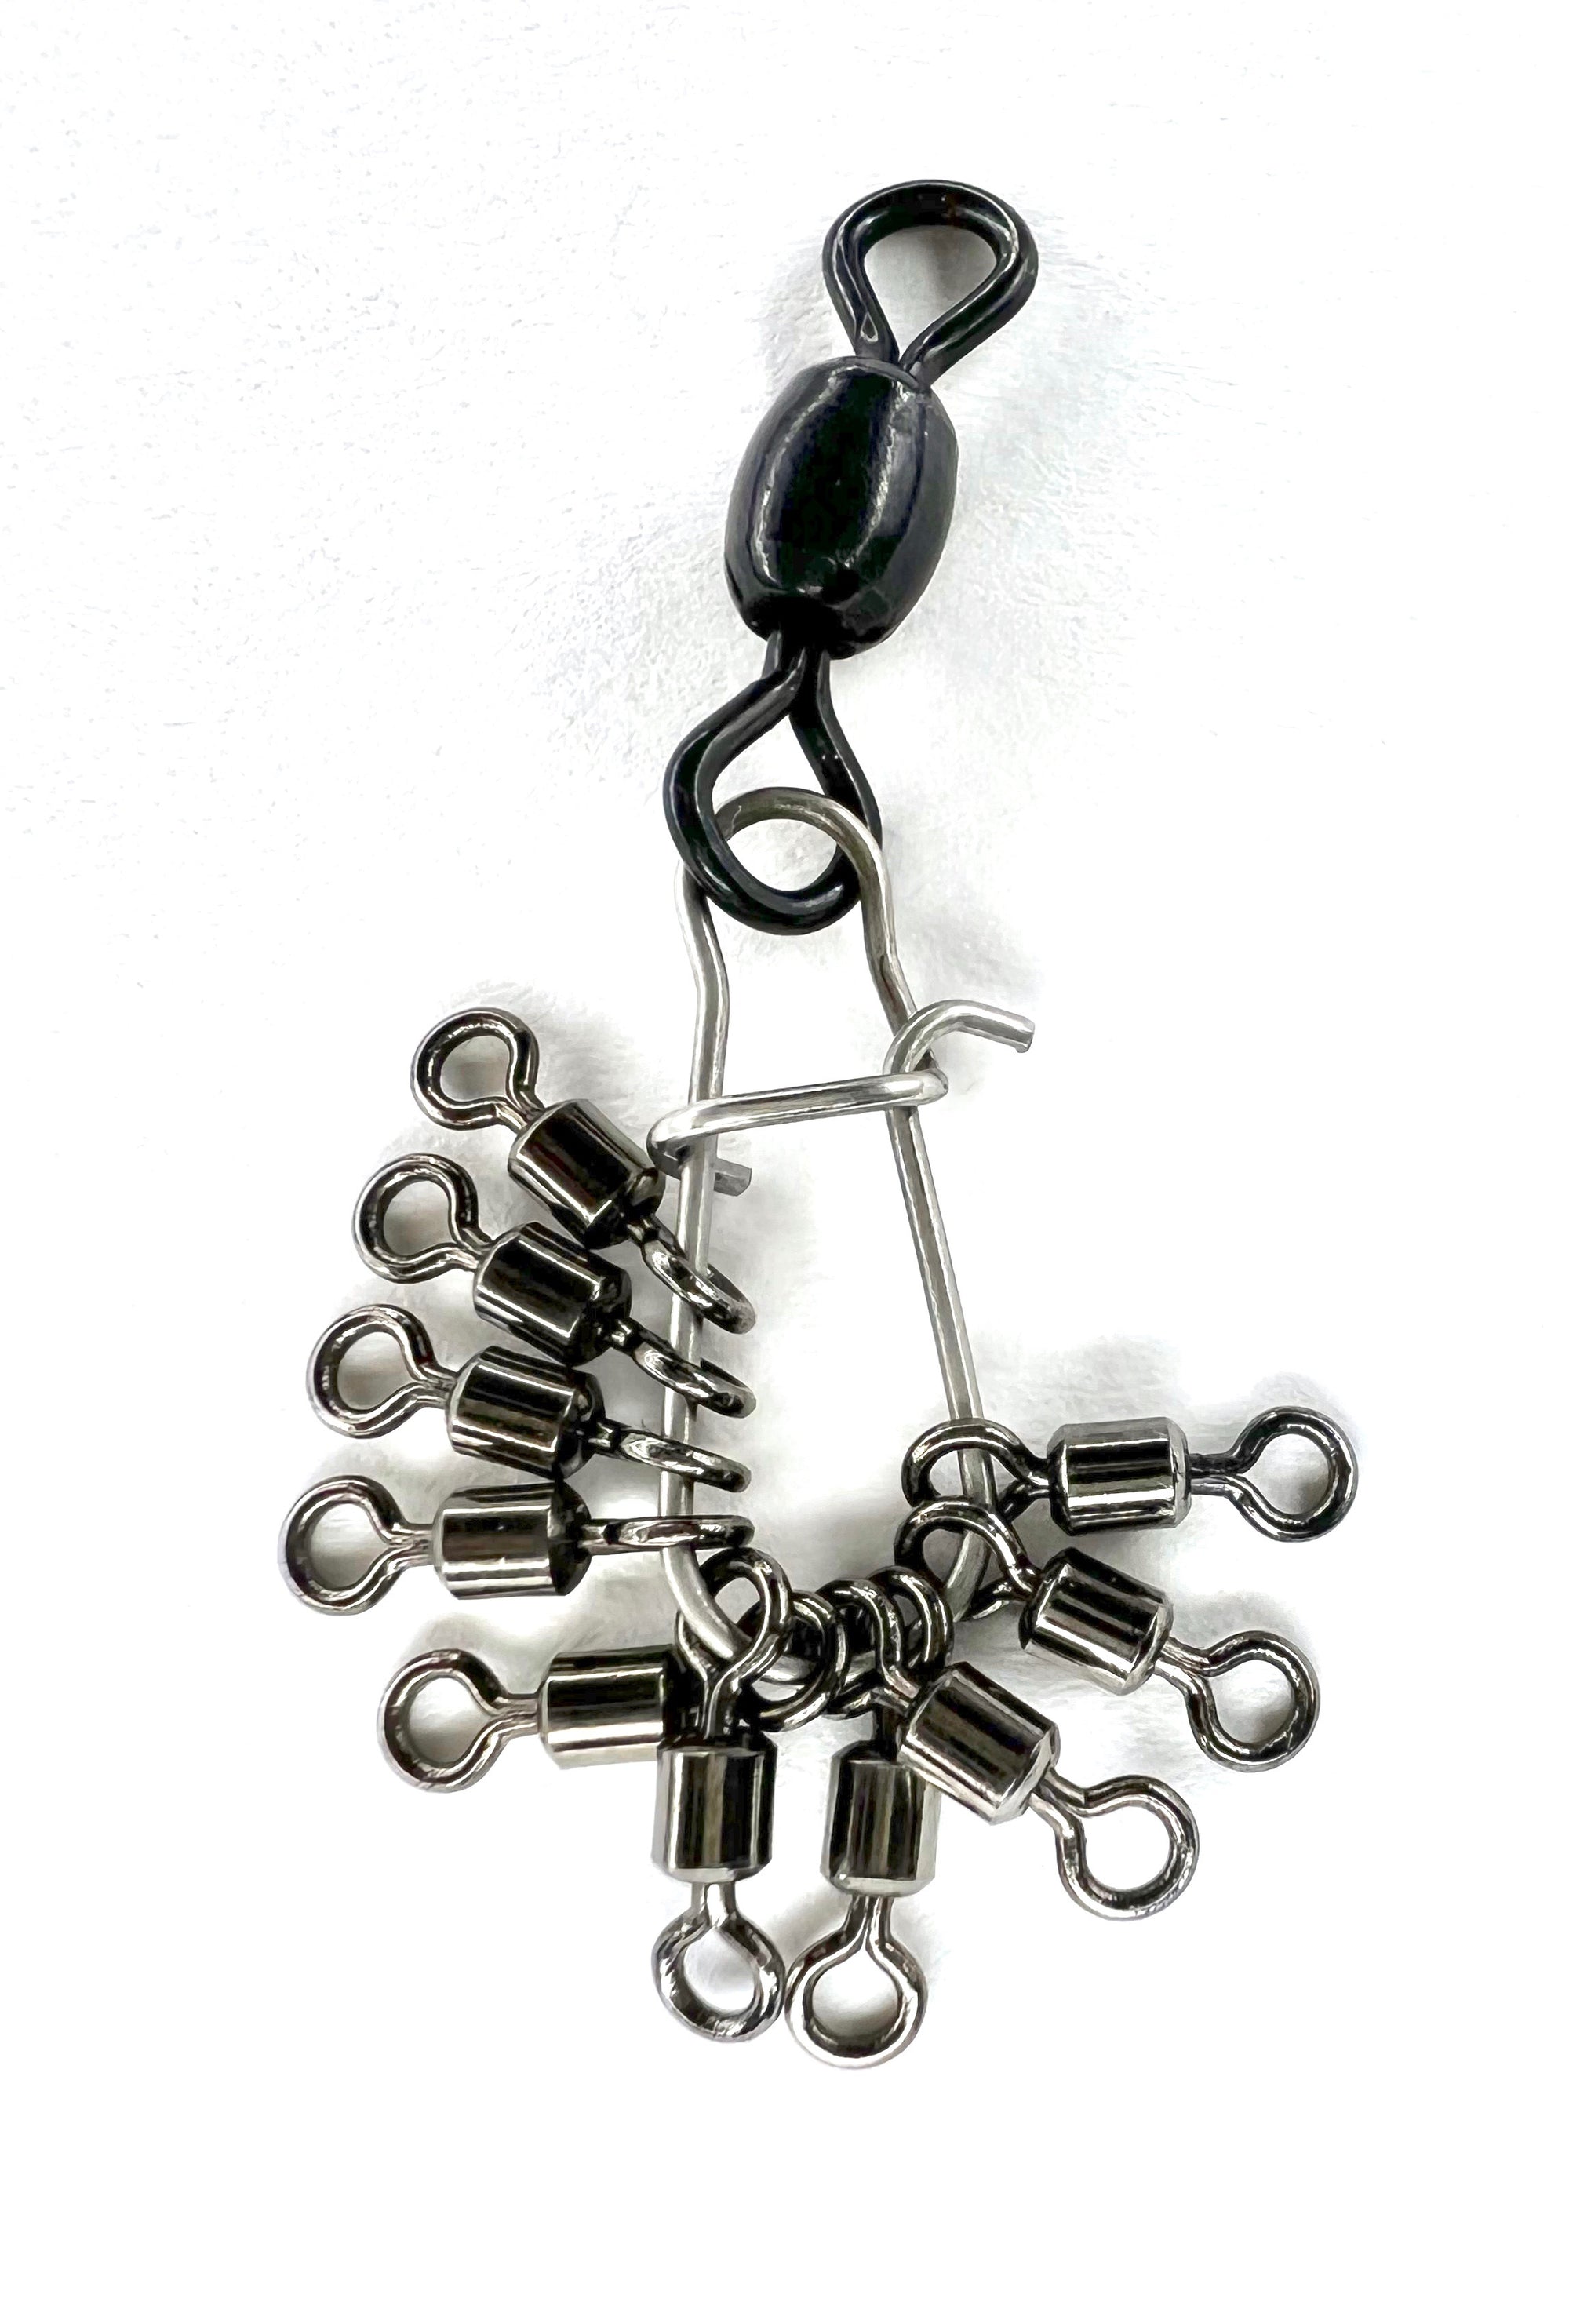  Micro Swivels For Fly Fishing